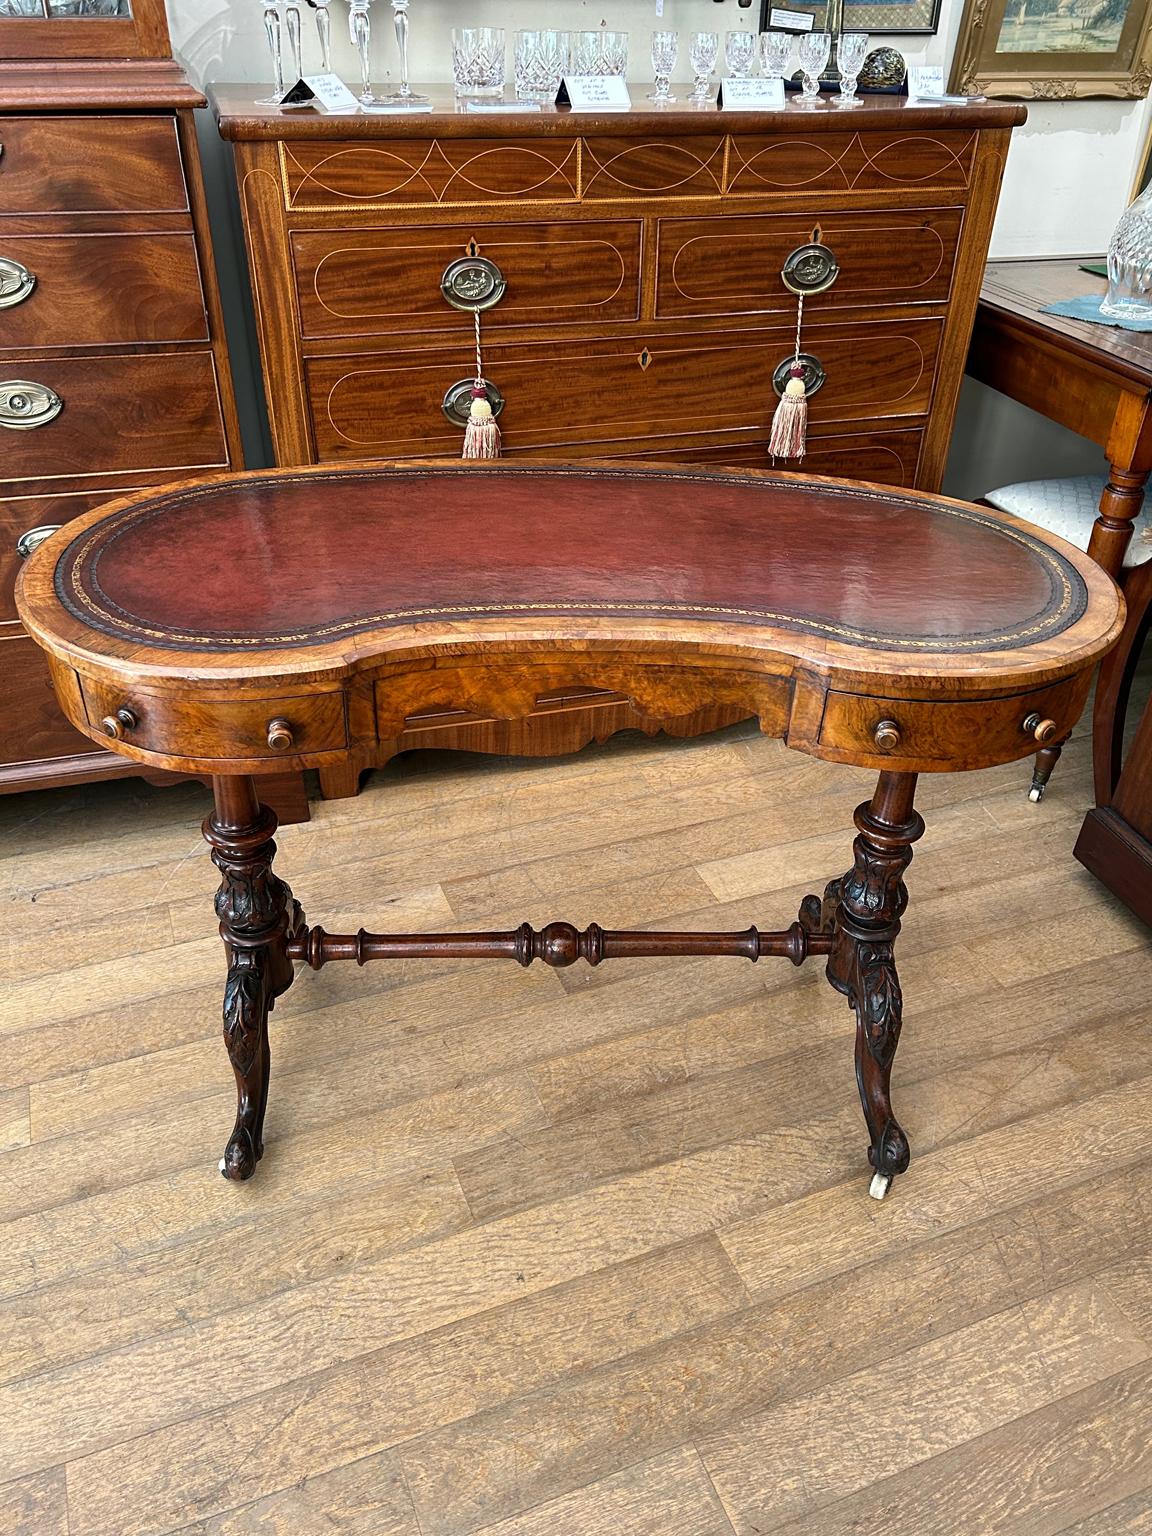 A very good quality 19th Century Victorian Figured Walnut Kidney shaped Writing Table, the top inset with a tooled leather top over two drawers. The turned supports are in solid walnut with finely carved decoration to the lower turnings. The